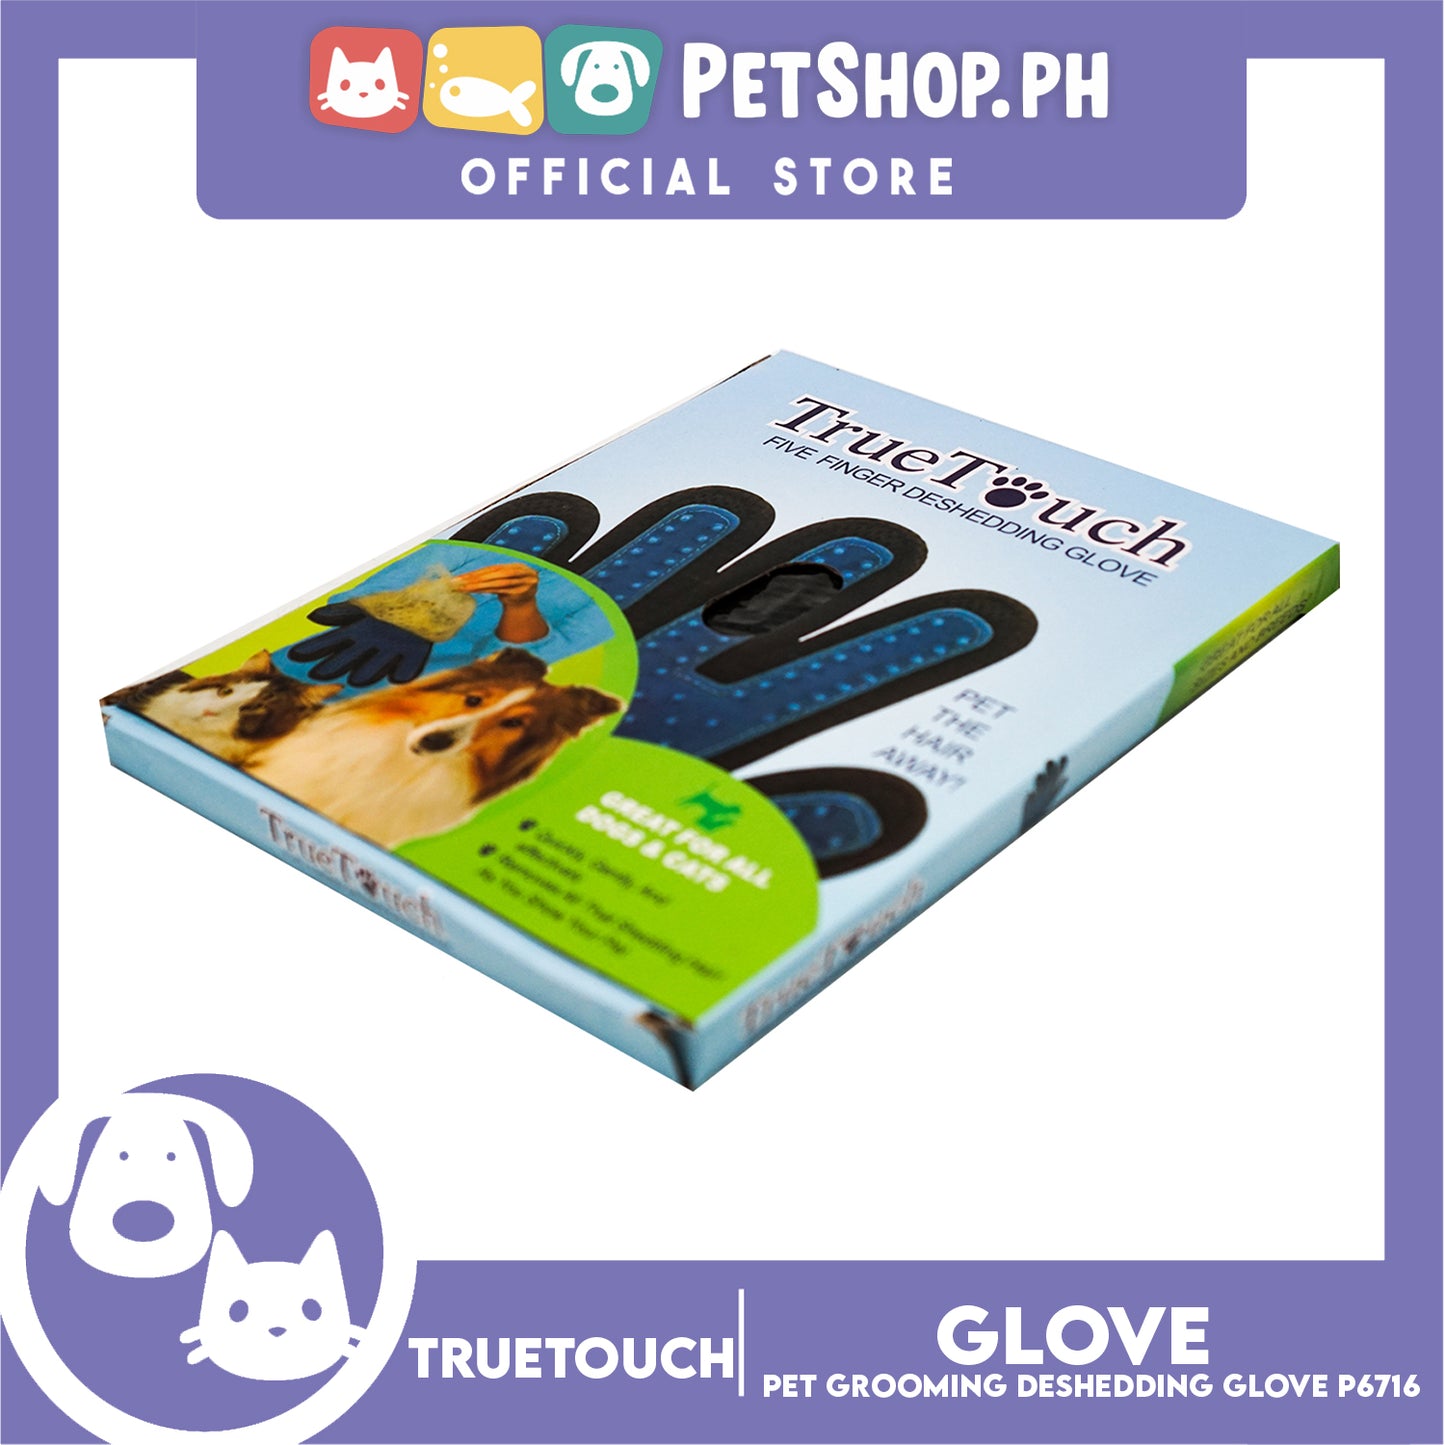 True Touch Pet Grooming Five Finger Deshedding Glove P6716 for Dogs & Cats